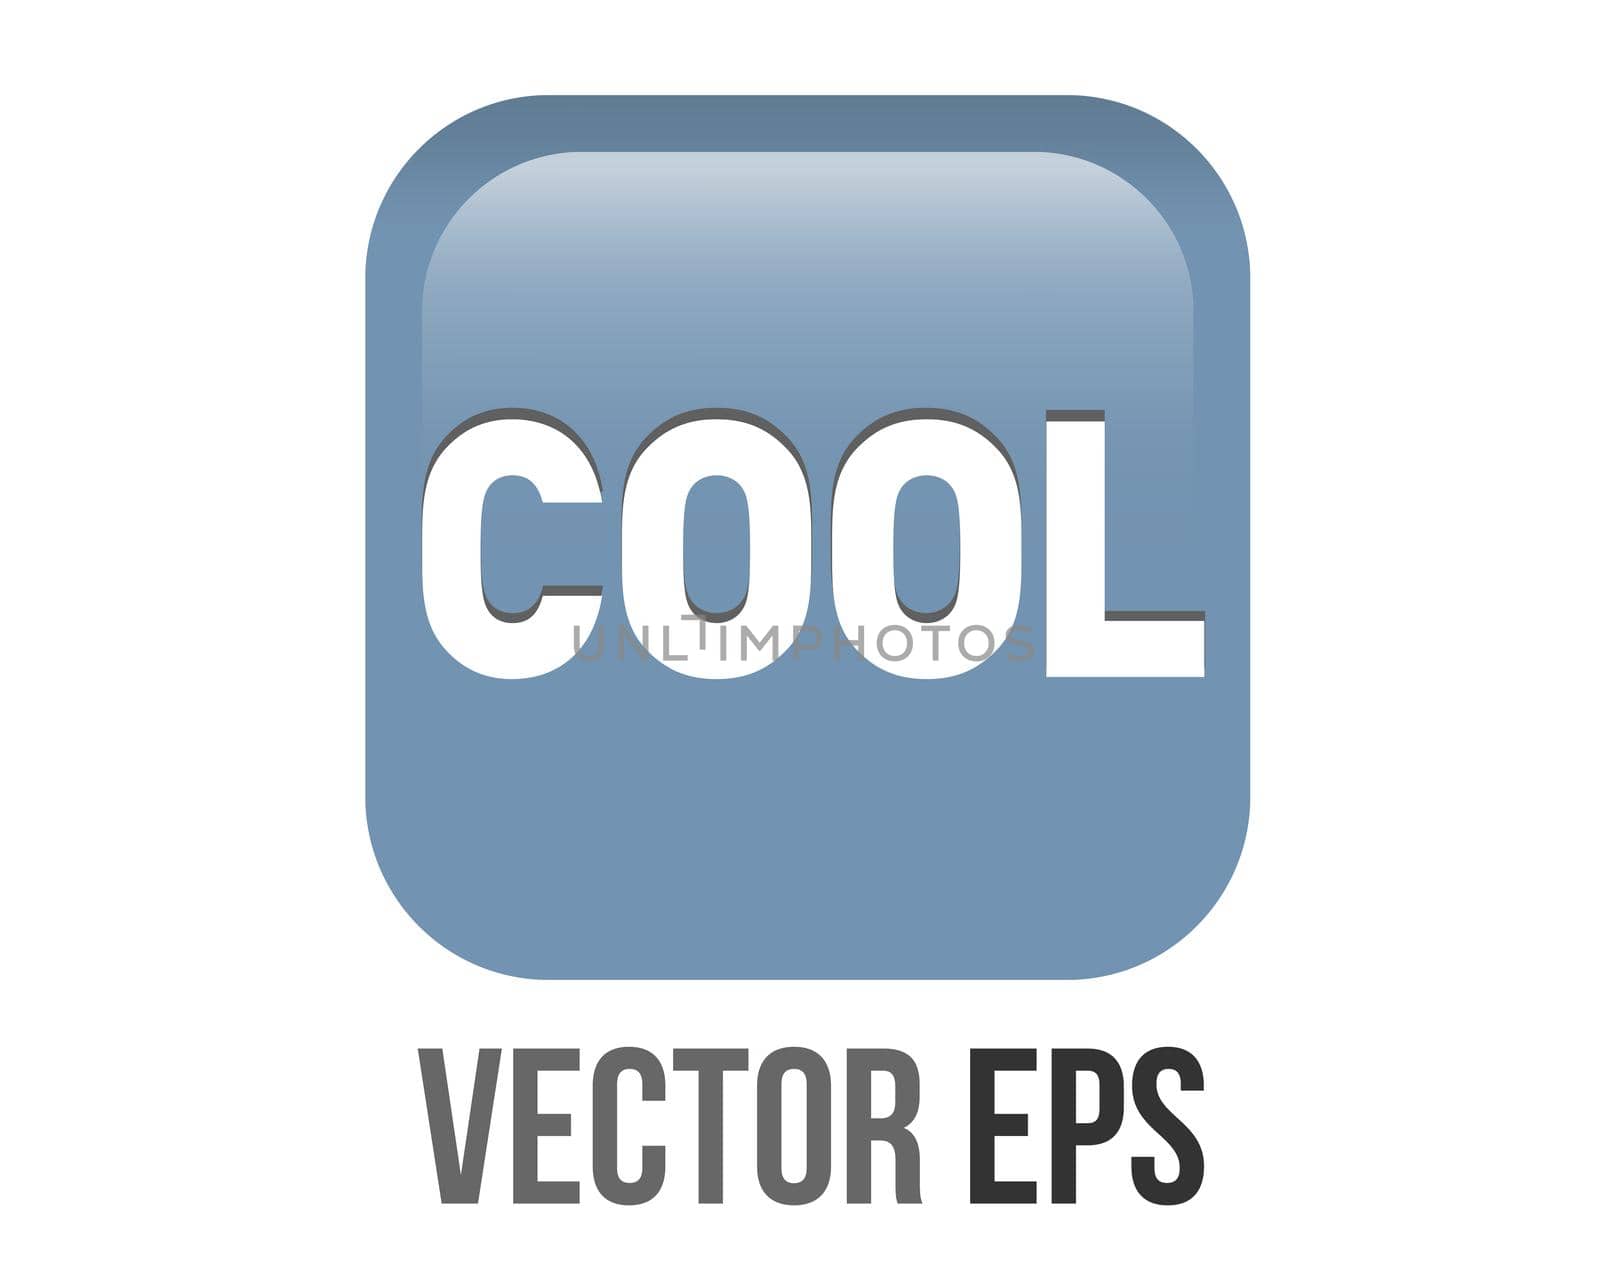 vector square gradient blue gray word cool button icon with white COOL word by cougarsan